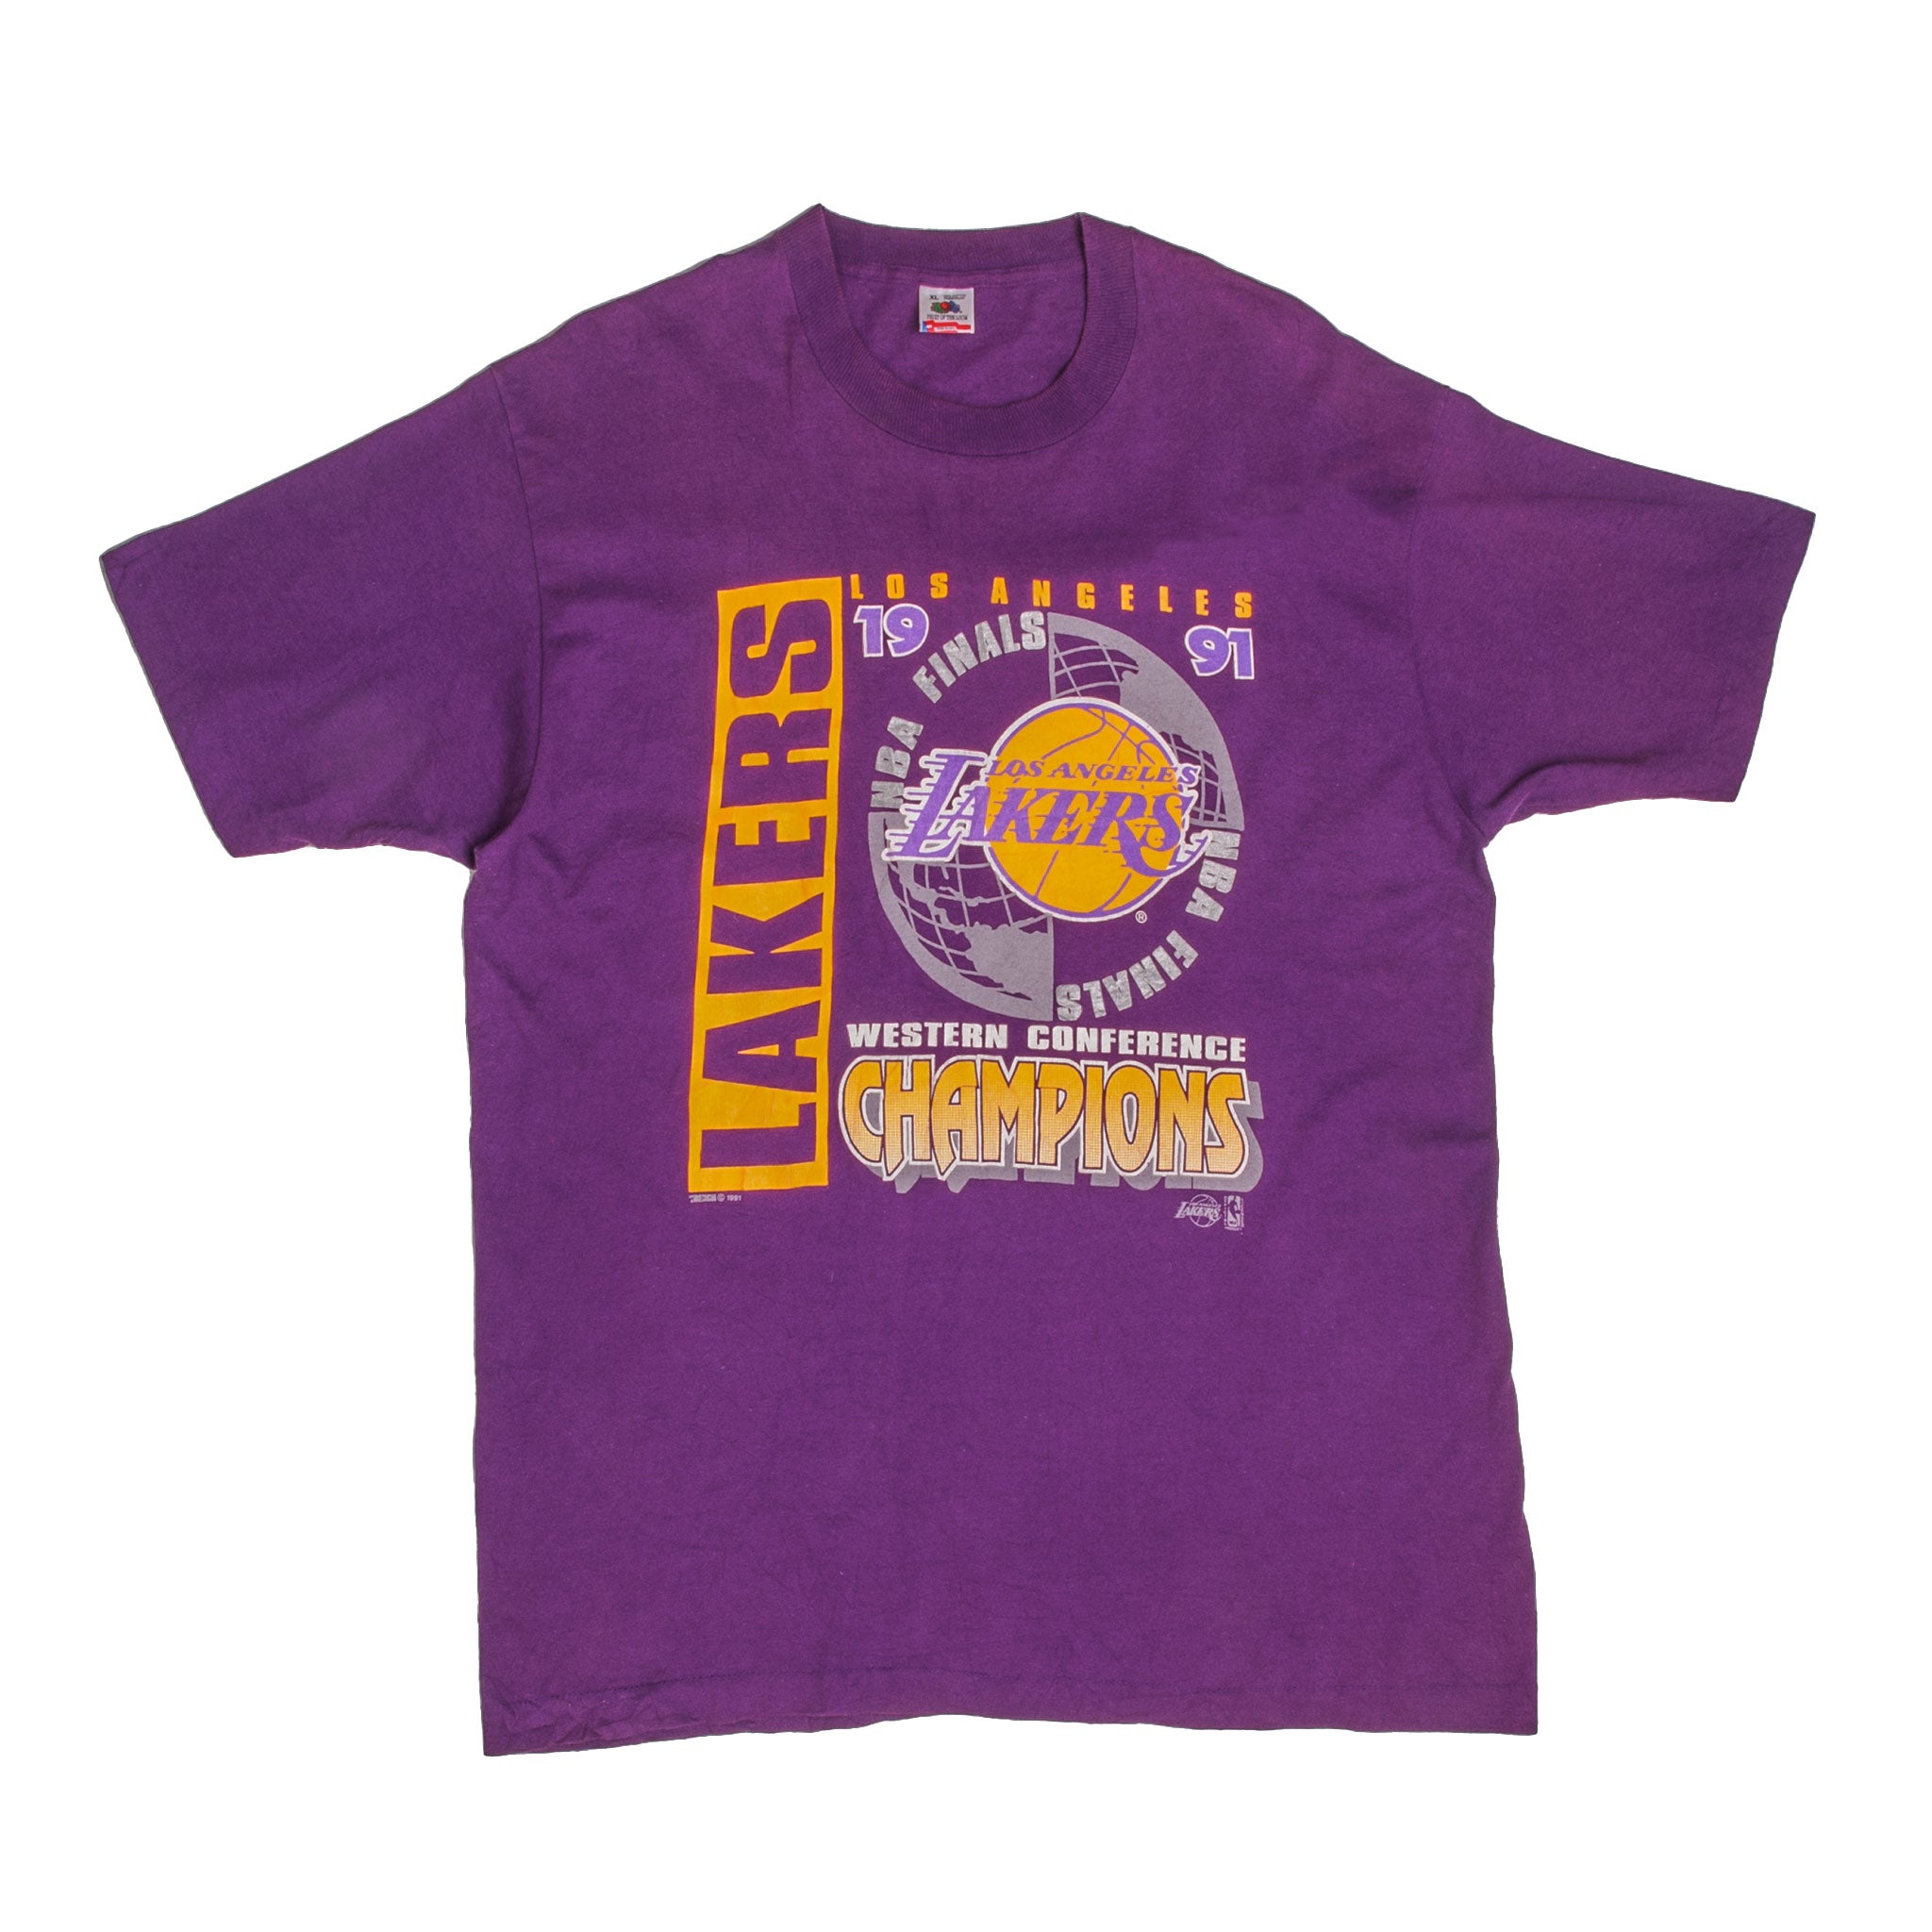 Sports / College Vintage NBA Los Angeles Lakers Western Conf Champions 1991 Tee Shirt XL Made USA